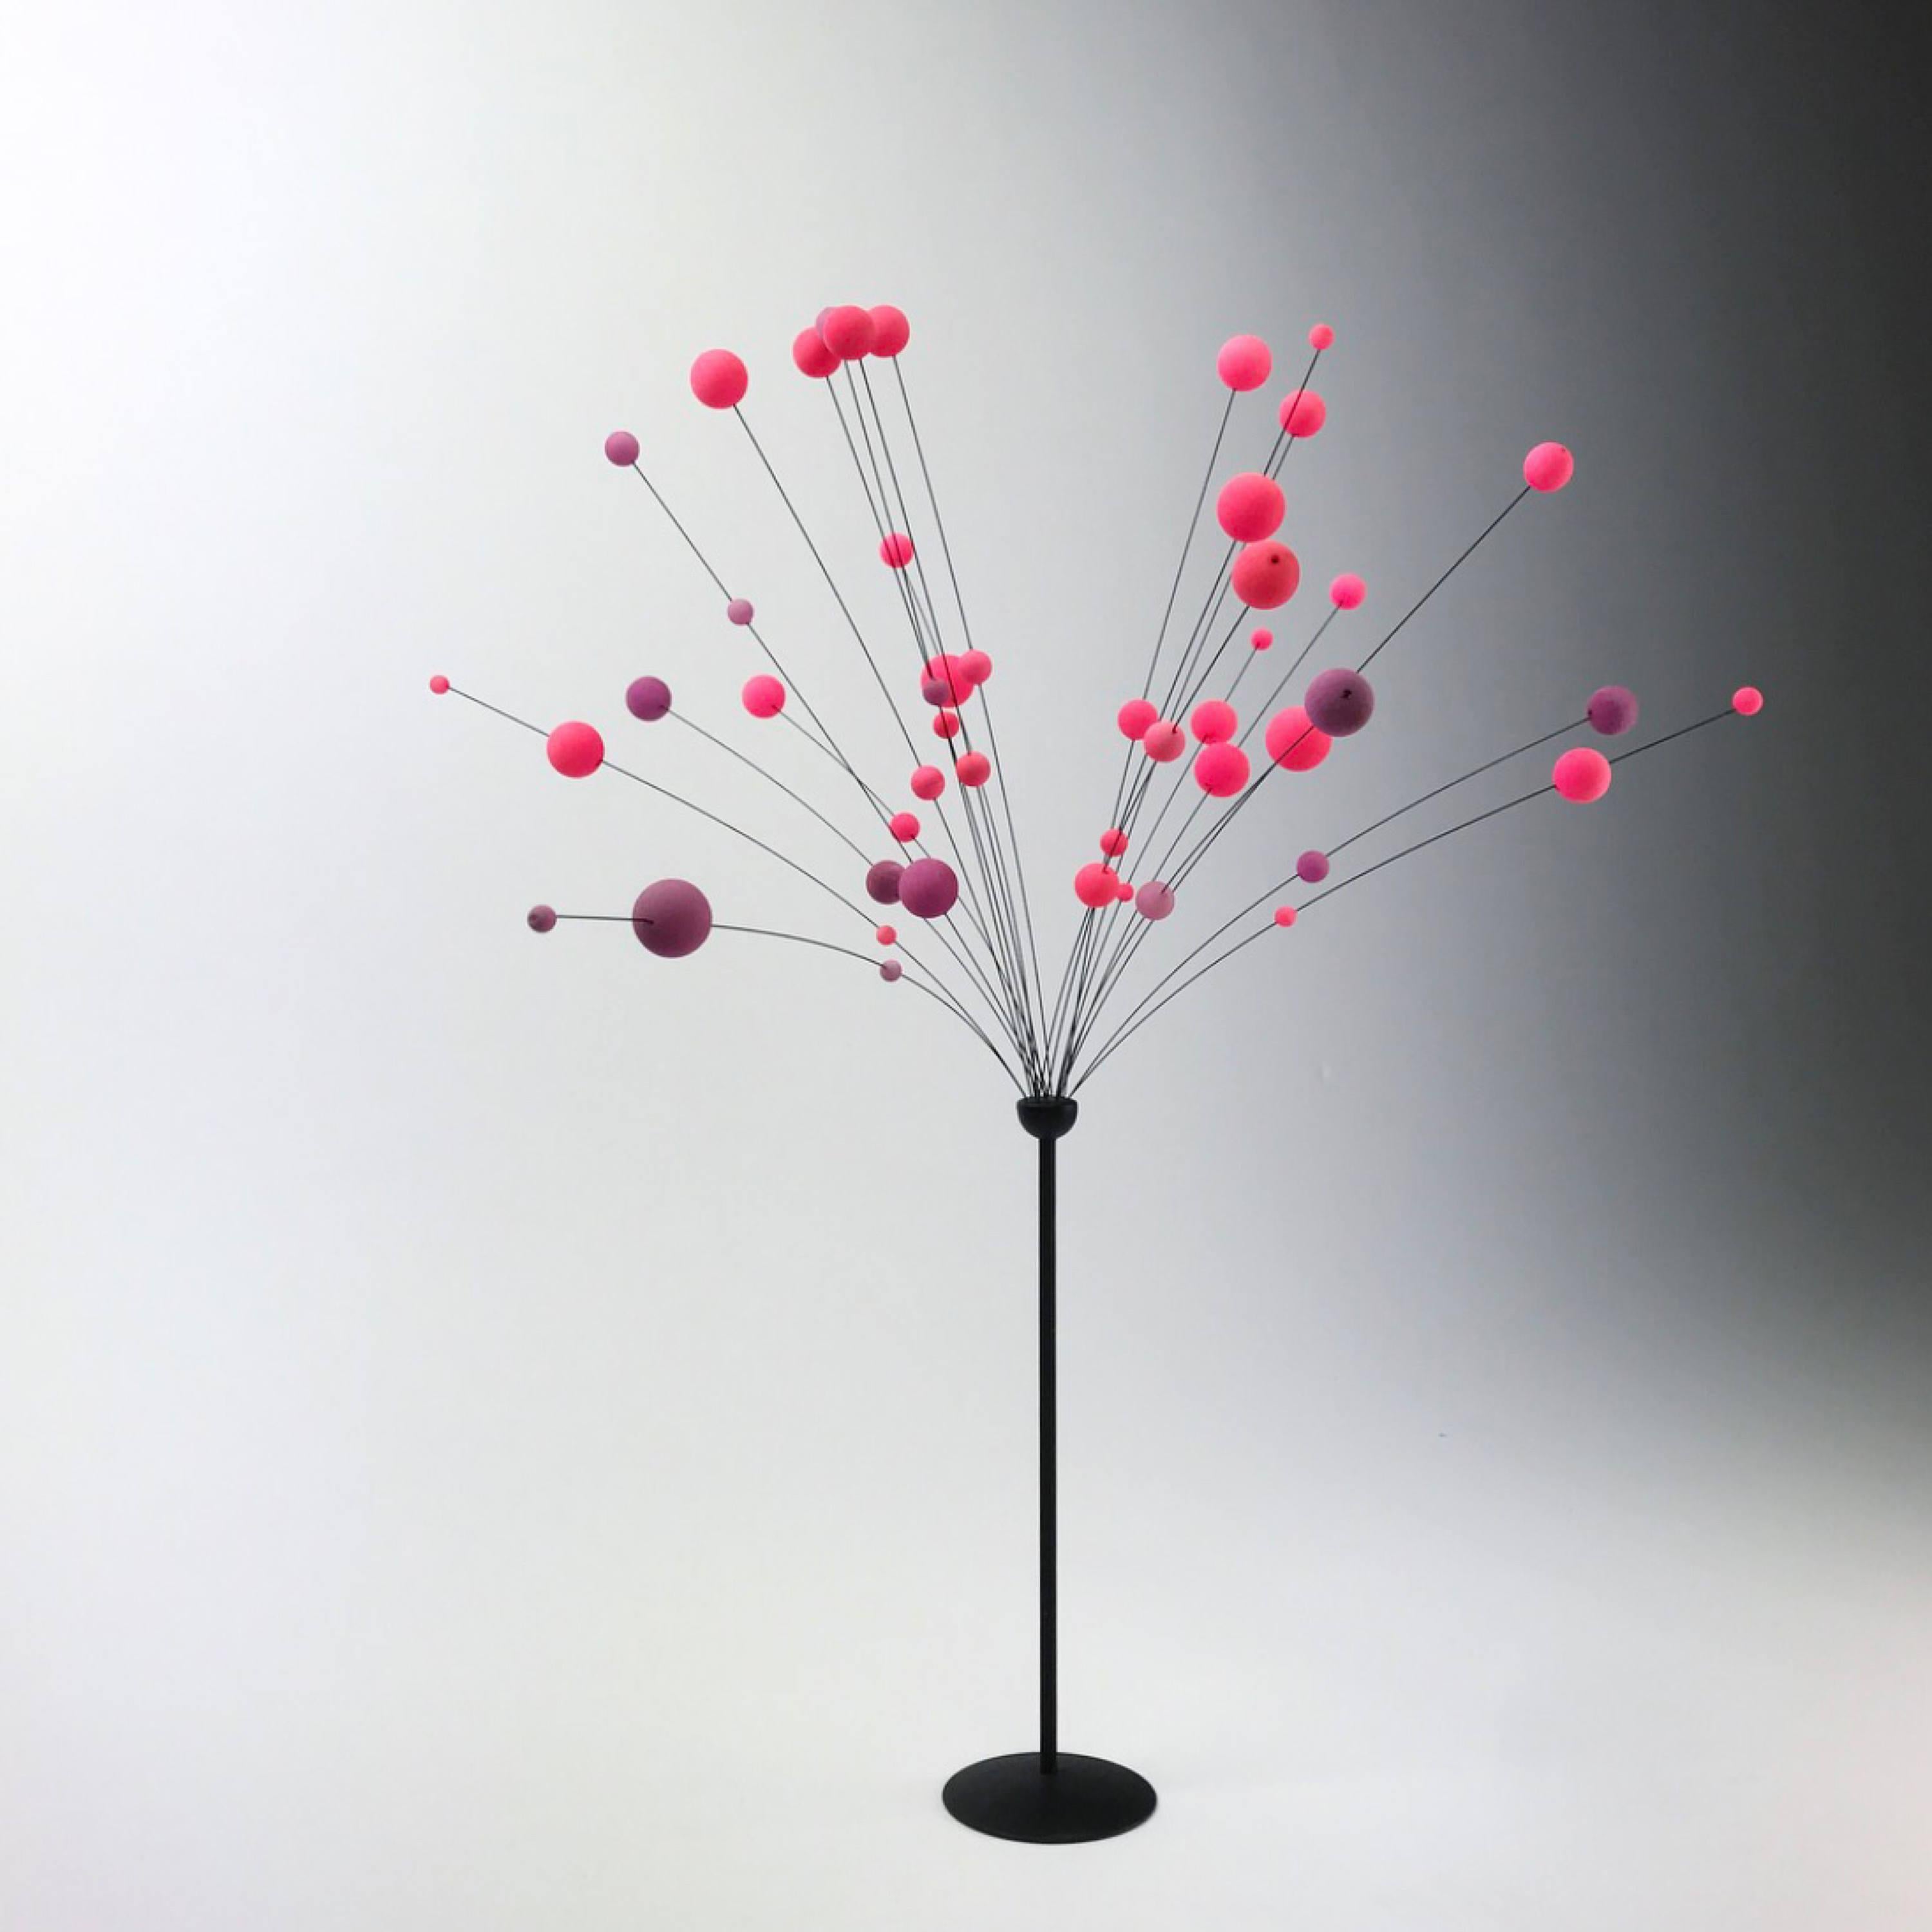 This absolutely beautiful space age table mobile is designed in the 1960s by Danish Laurids Lonborg.

The sputnik kinetic interior decorative sculpture will be a nice Mid-Century Modern find for you contemporary home. 

Beautiful pink and purple